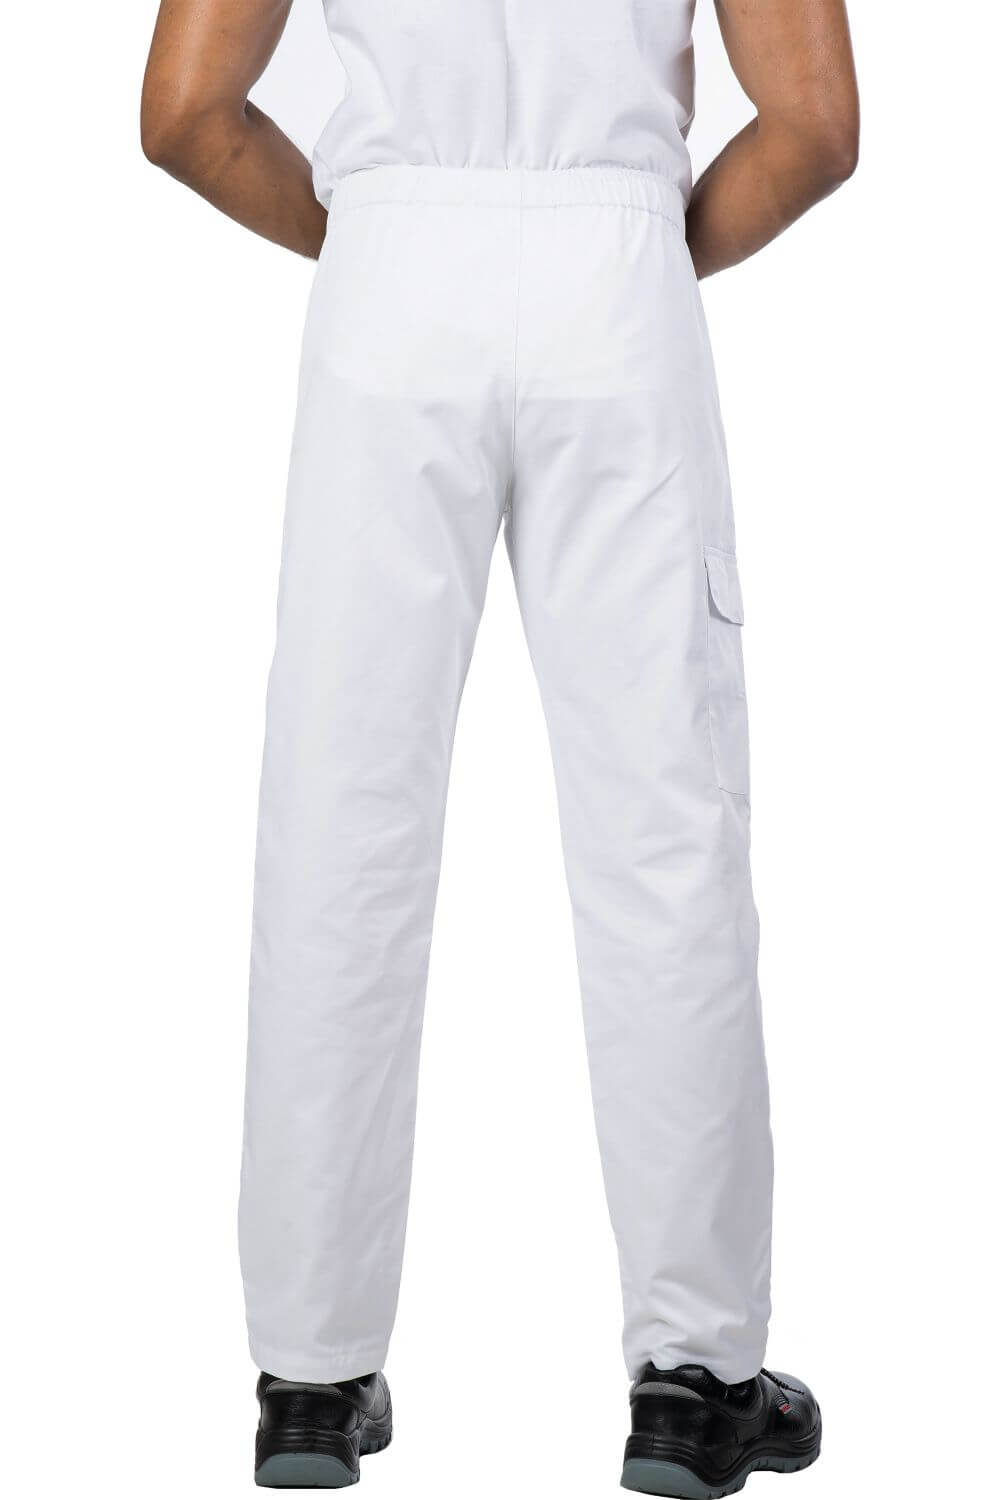 Easy fit elasticated Waist Cotton Blend Chef Trouser